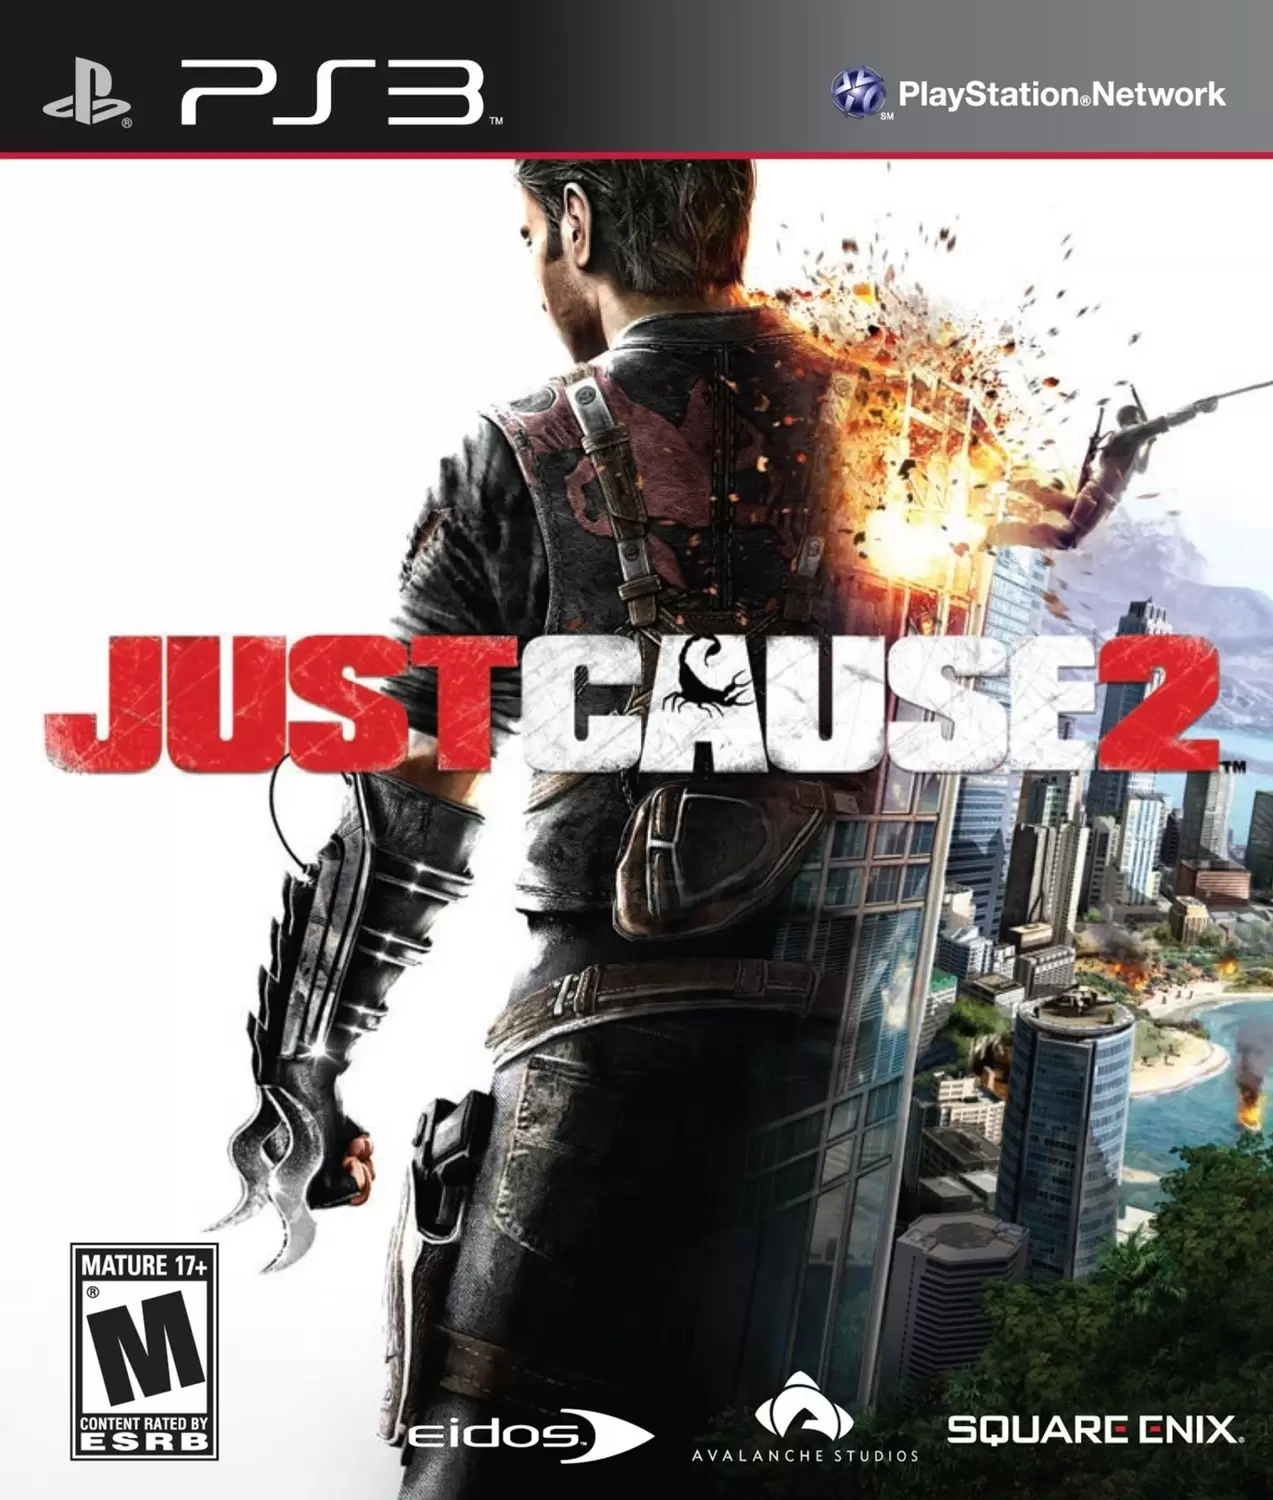 PS3 Games - Just Cause 2